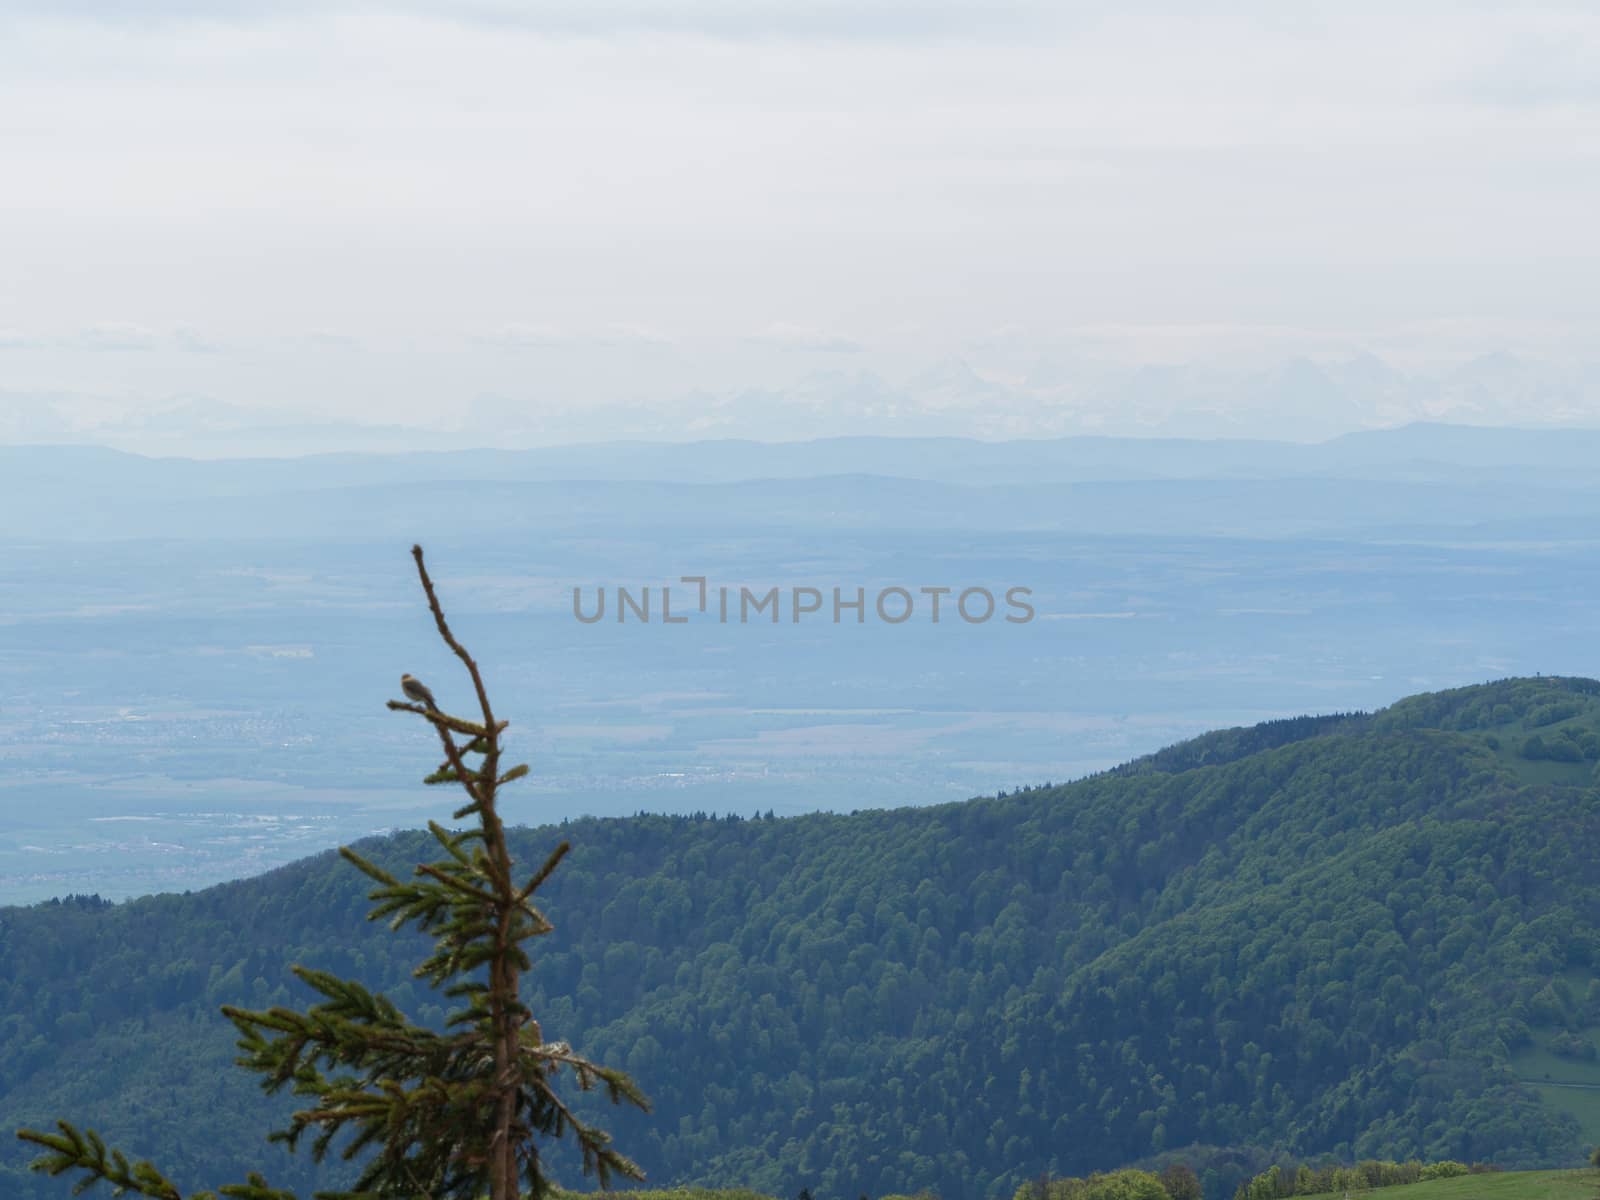 Overlooking the Vosges hills with the French Alps in the distance